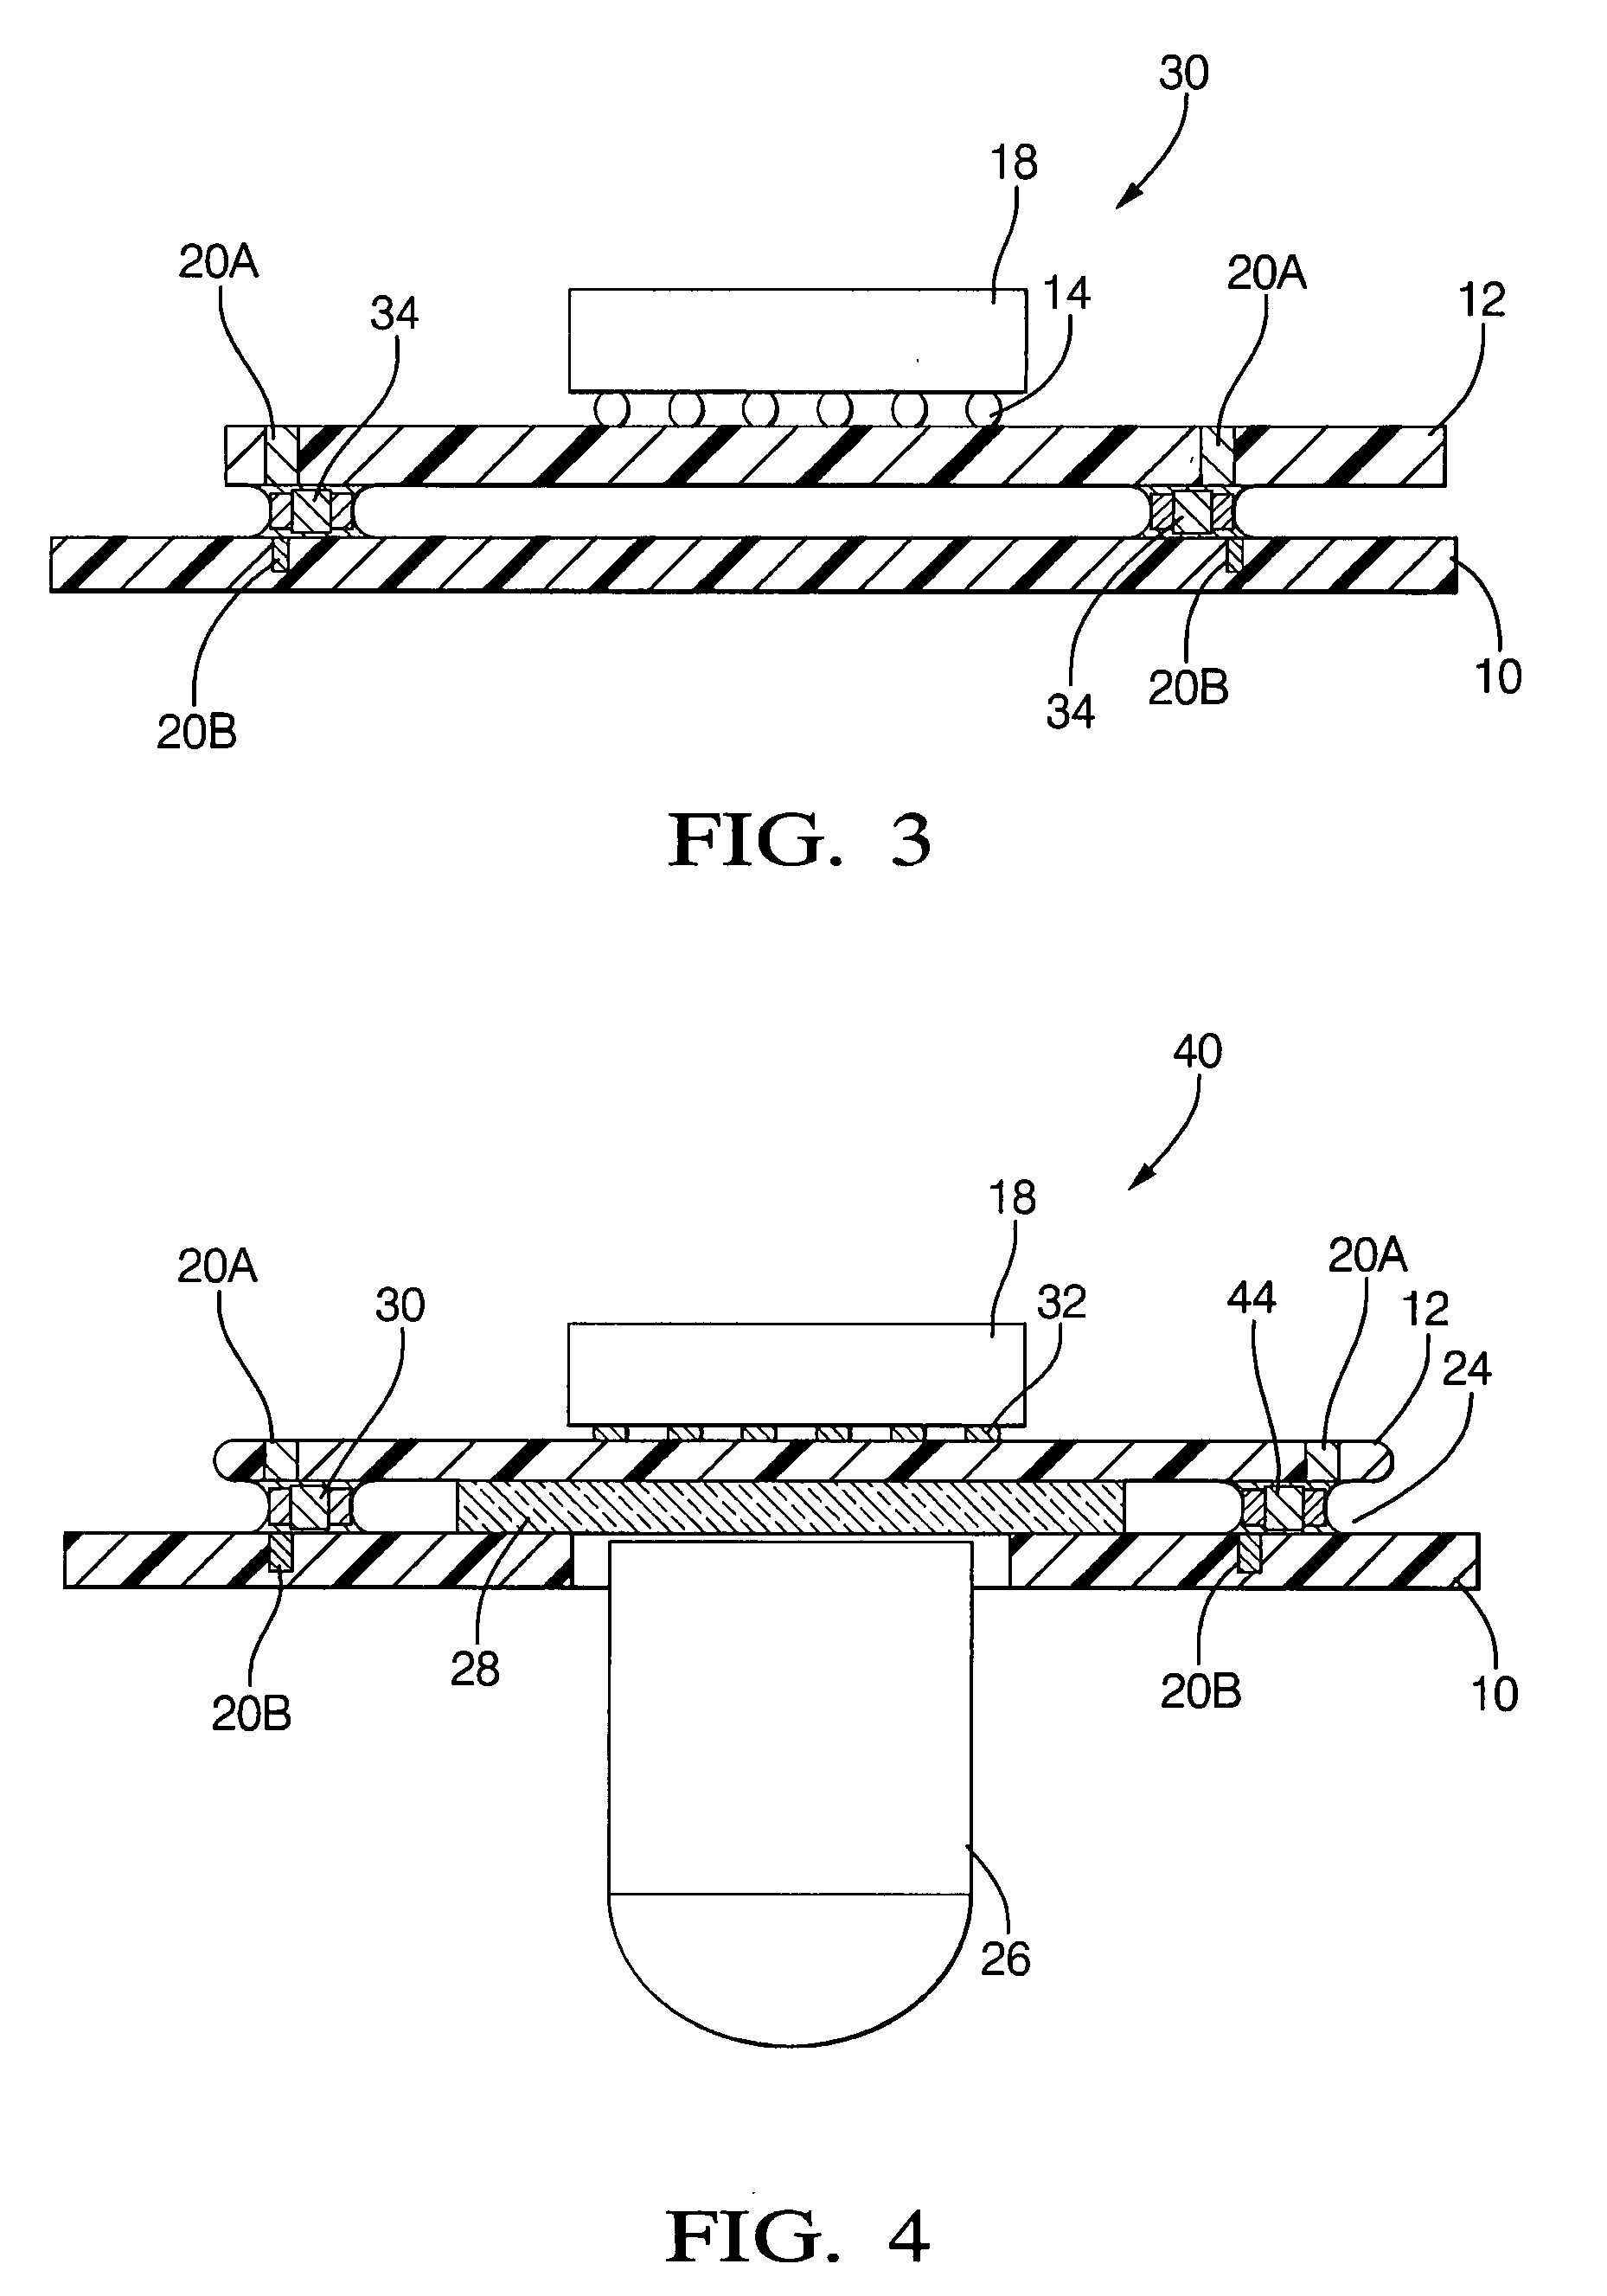 Interconnect for an electrical circuit substrate